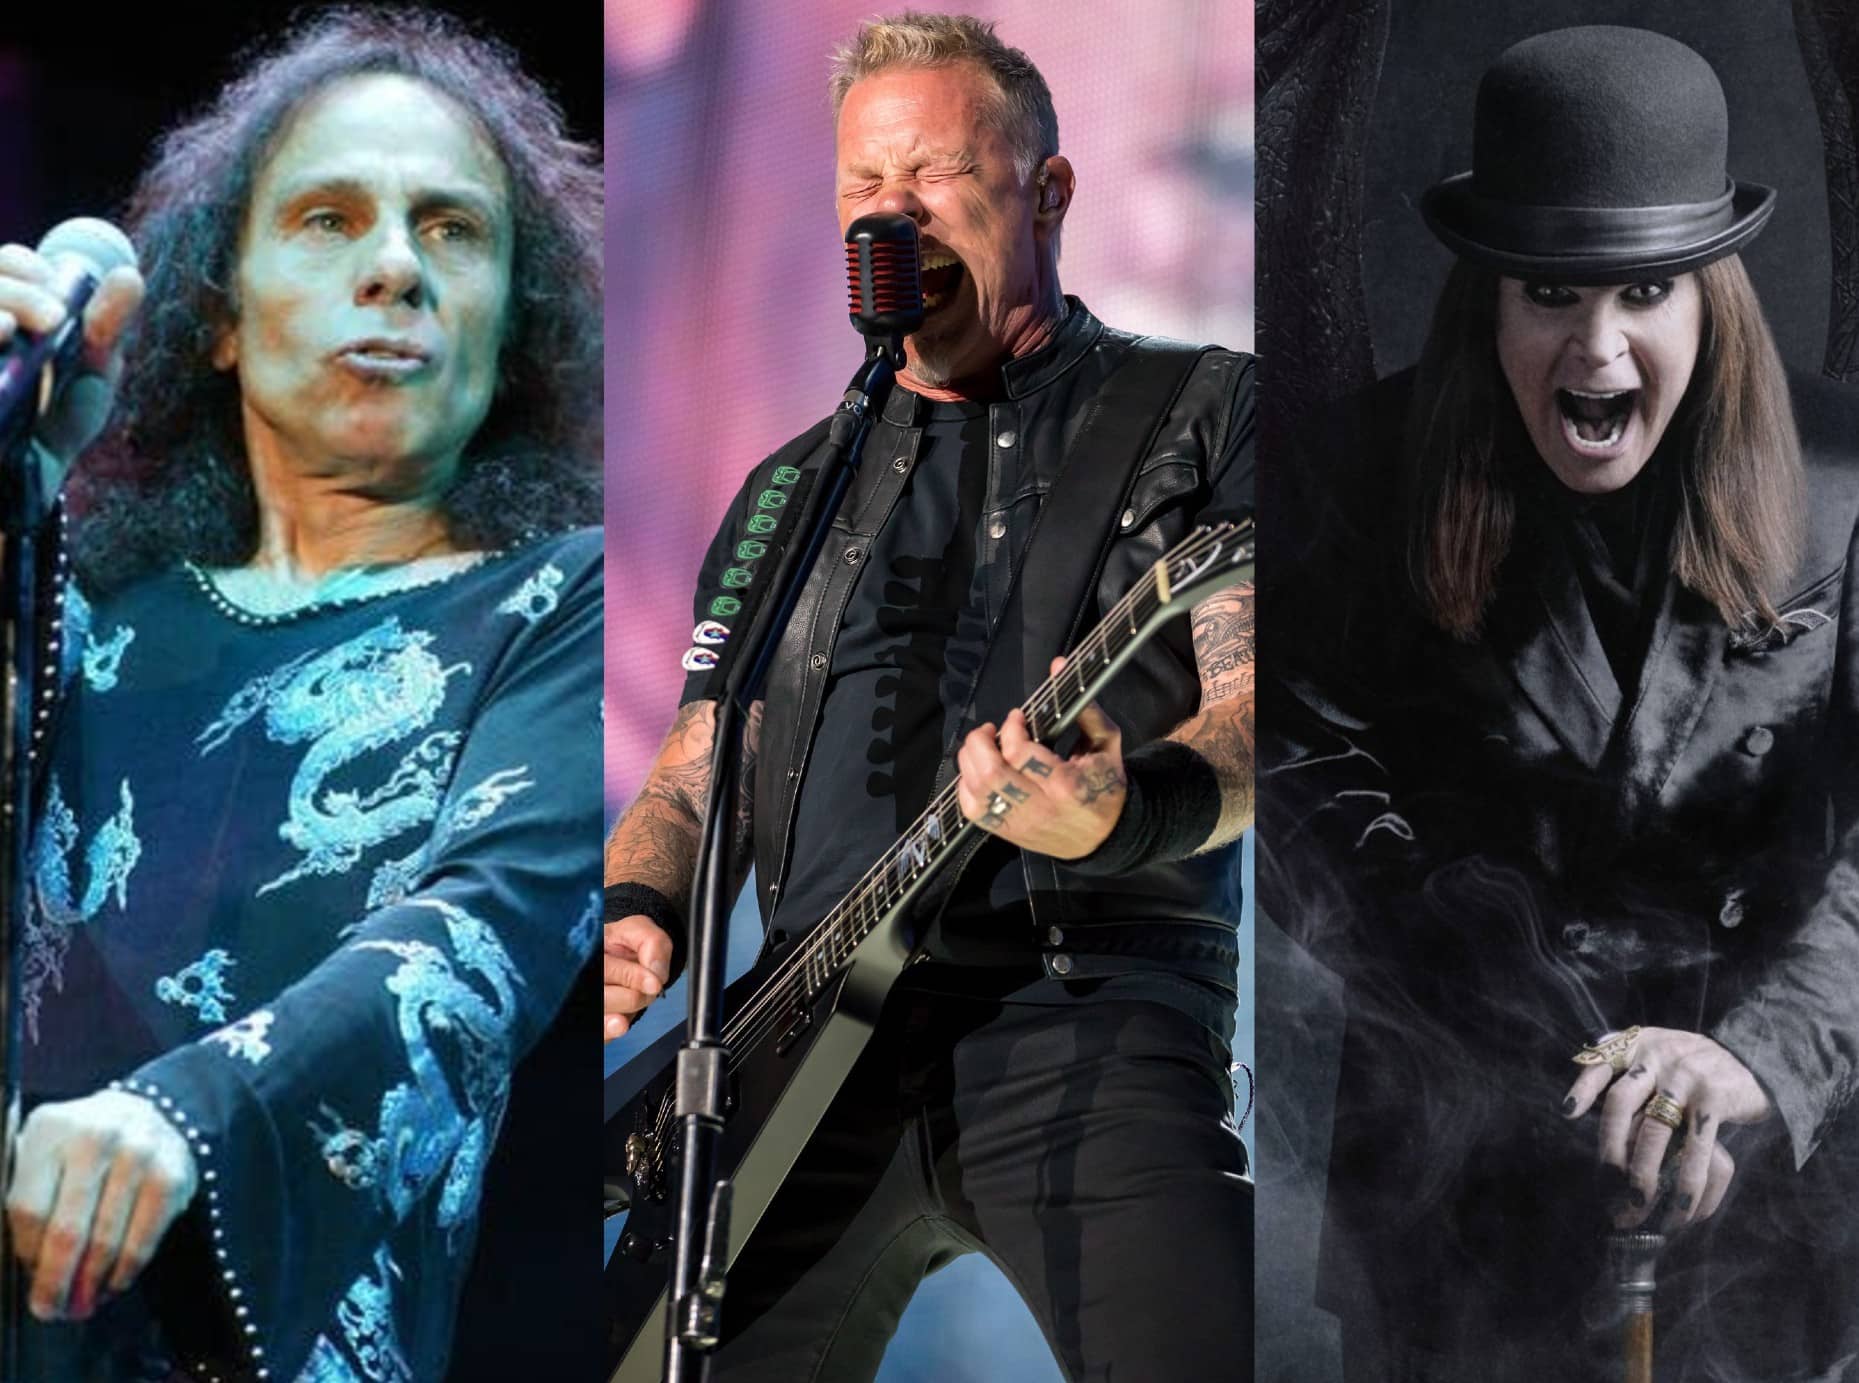 VOTE HERE: Who Do YOU Think Are The Most Influential HEAVY METAL BANDS Of All Time?